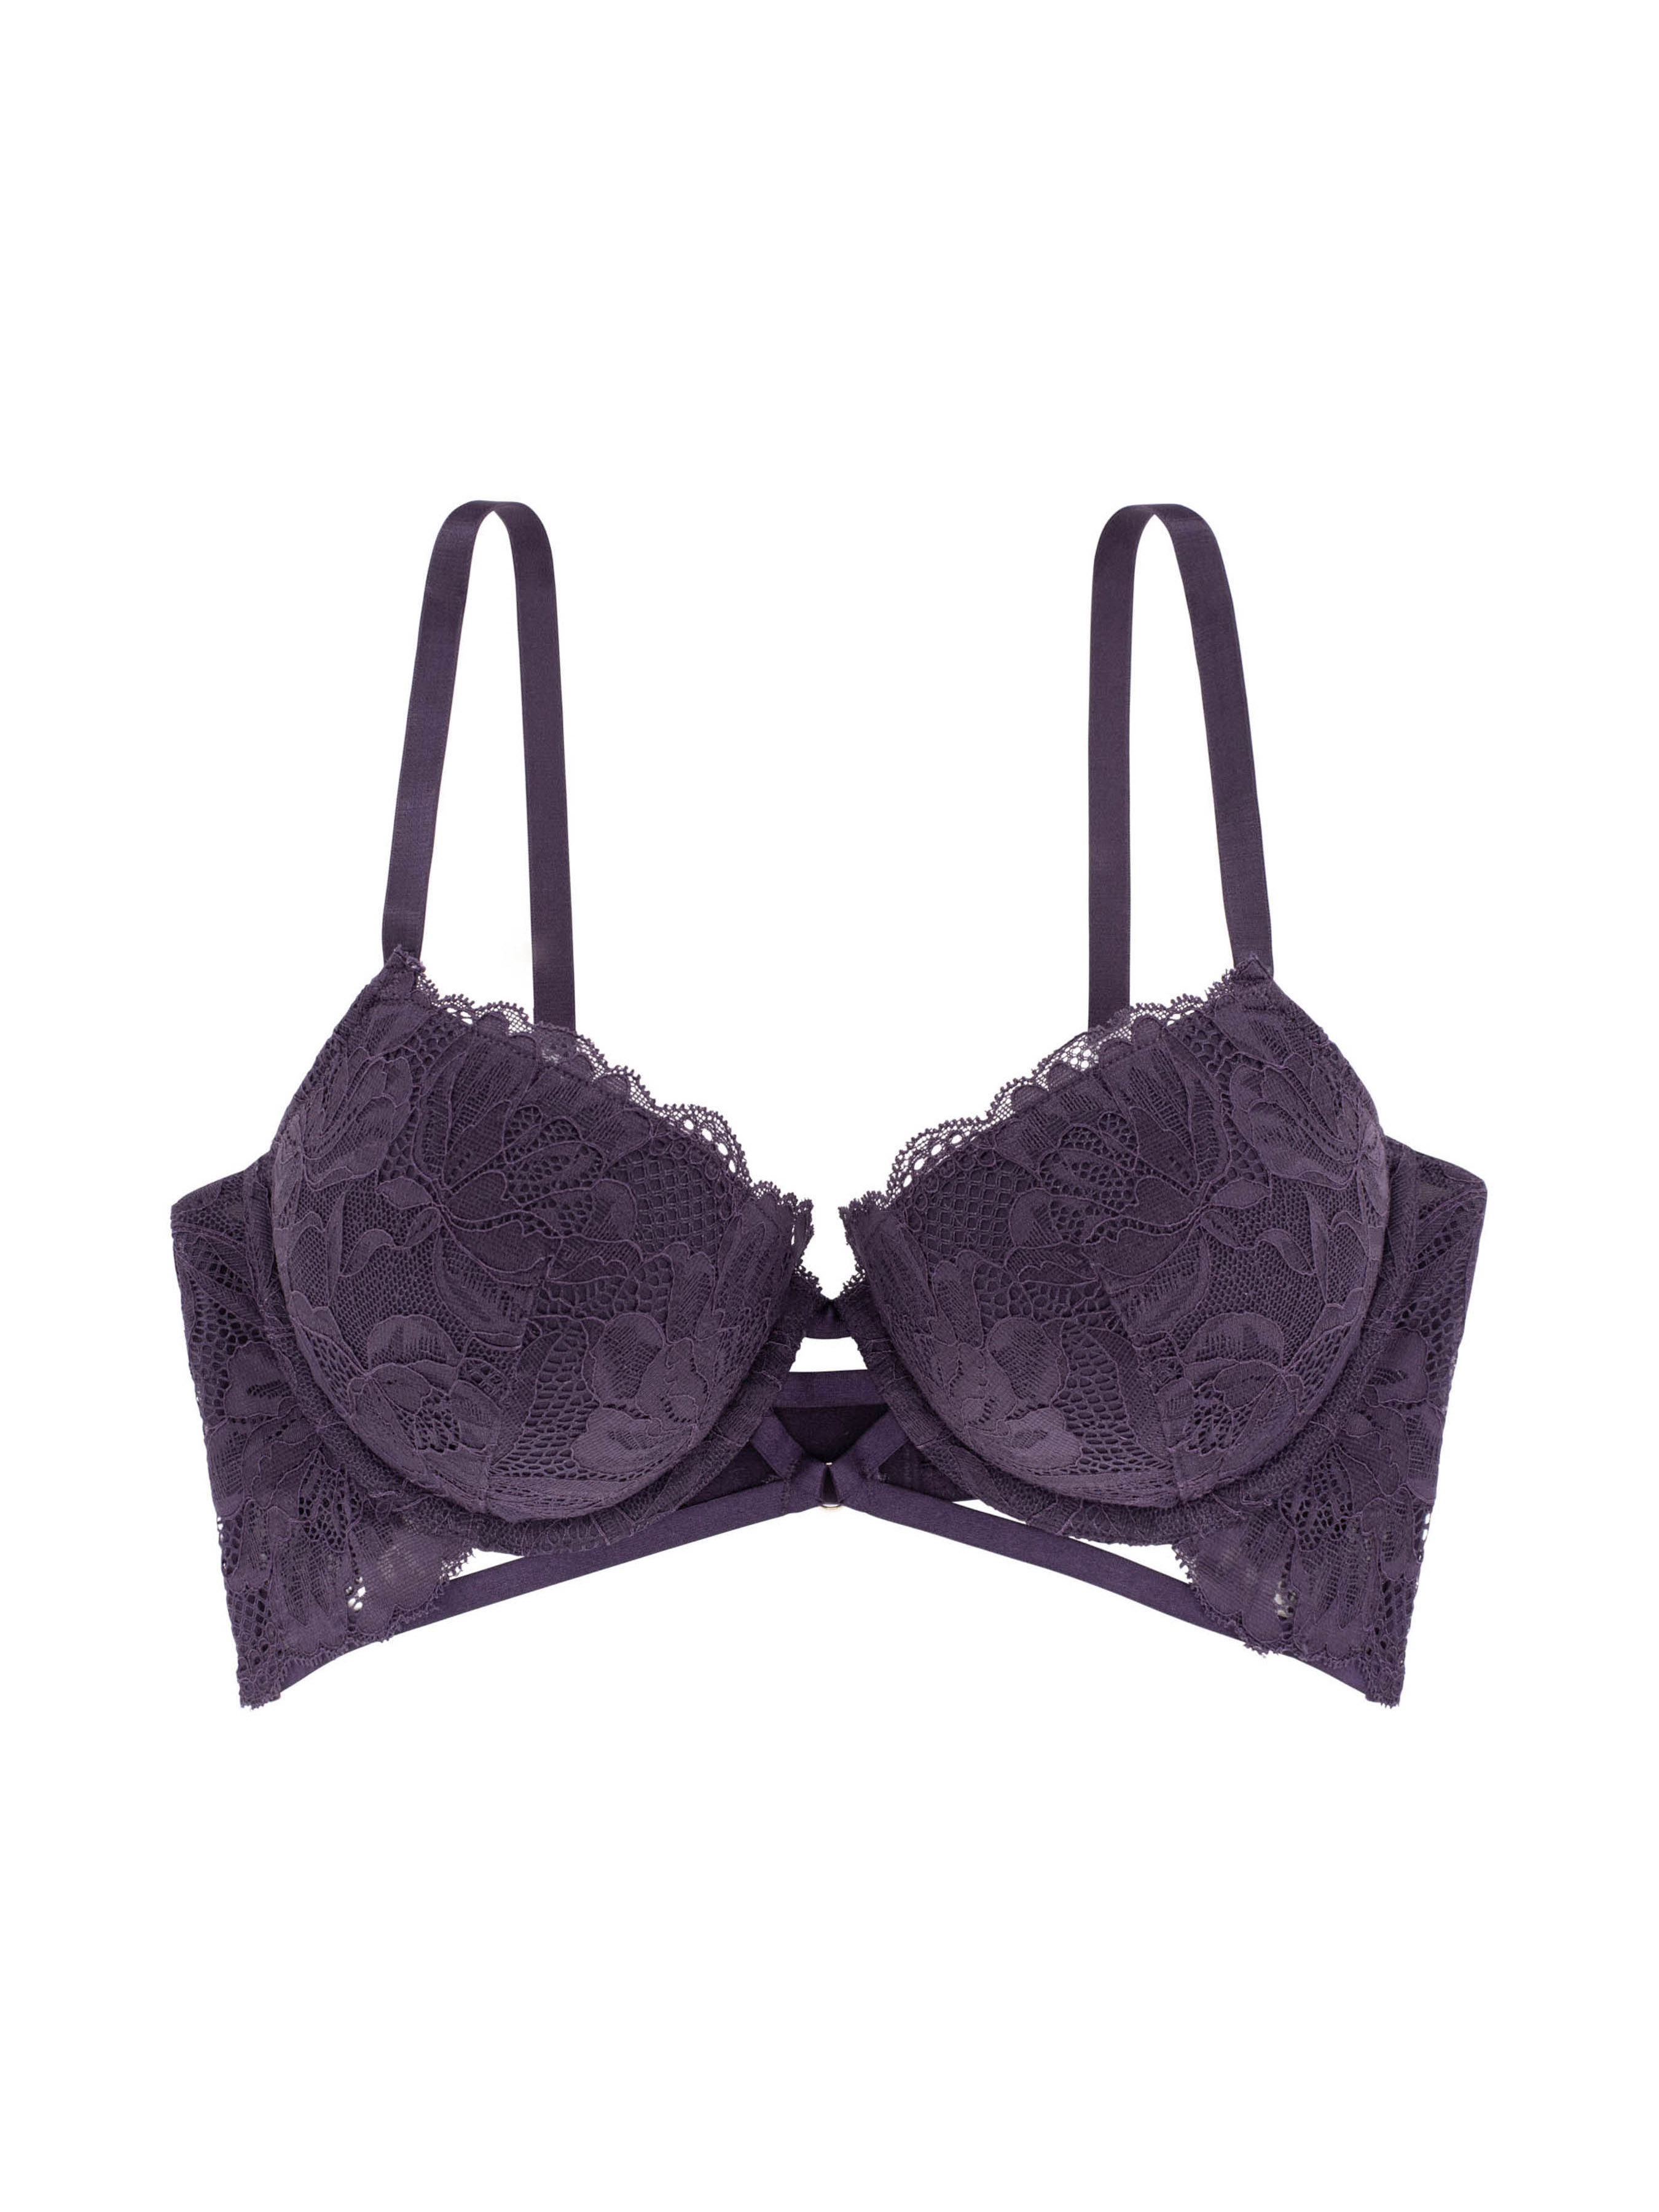 Galaxy Undergarments Lovely Lace Non-Padded Wired Bra - Black